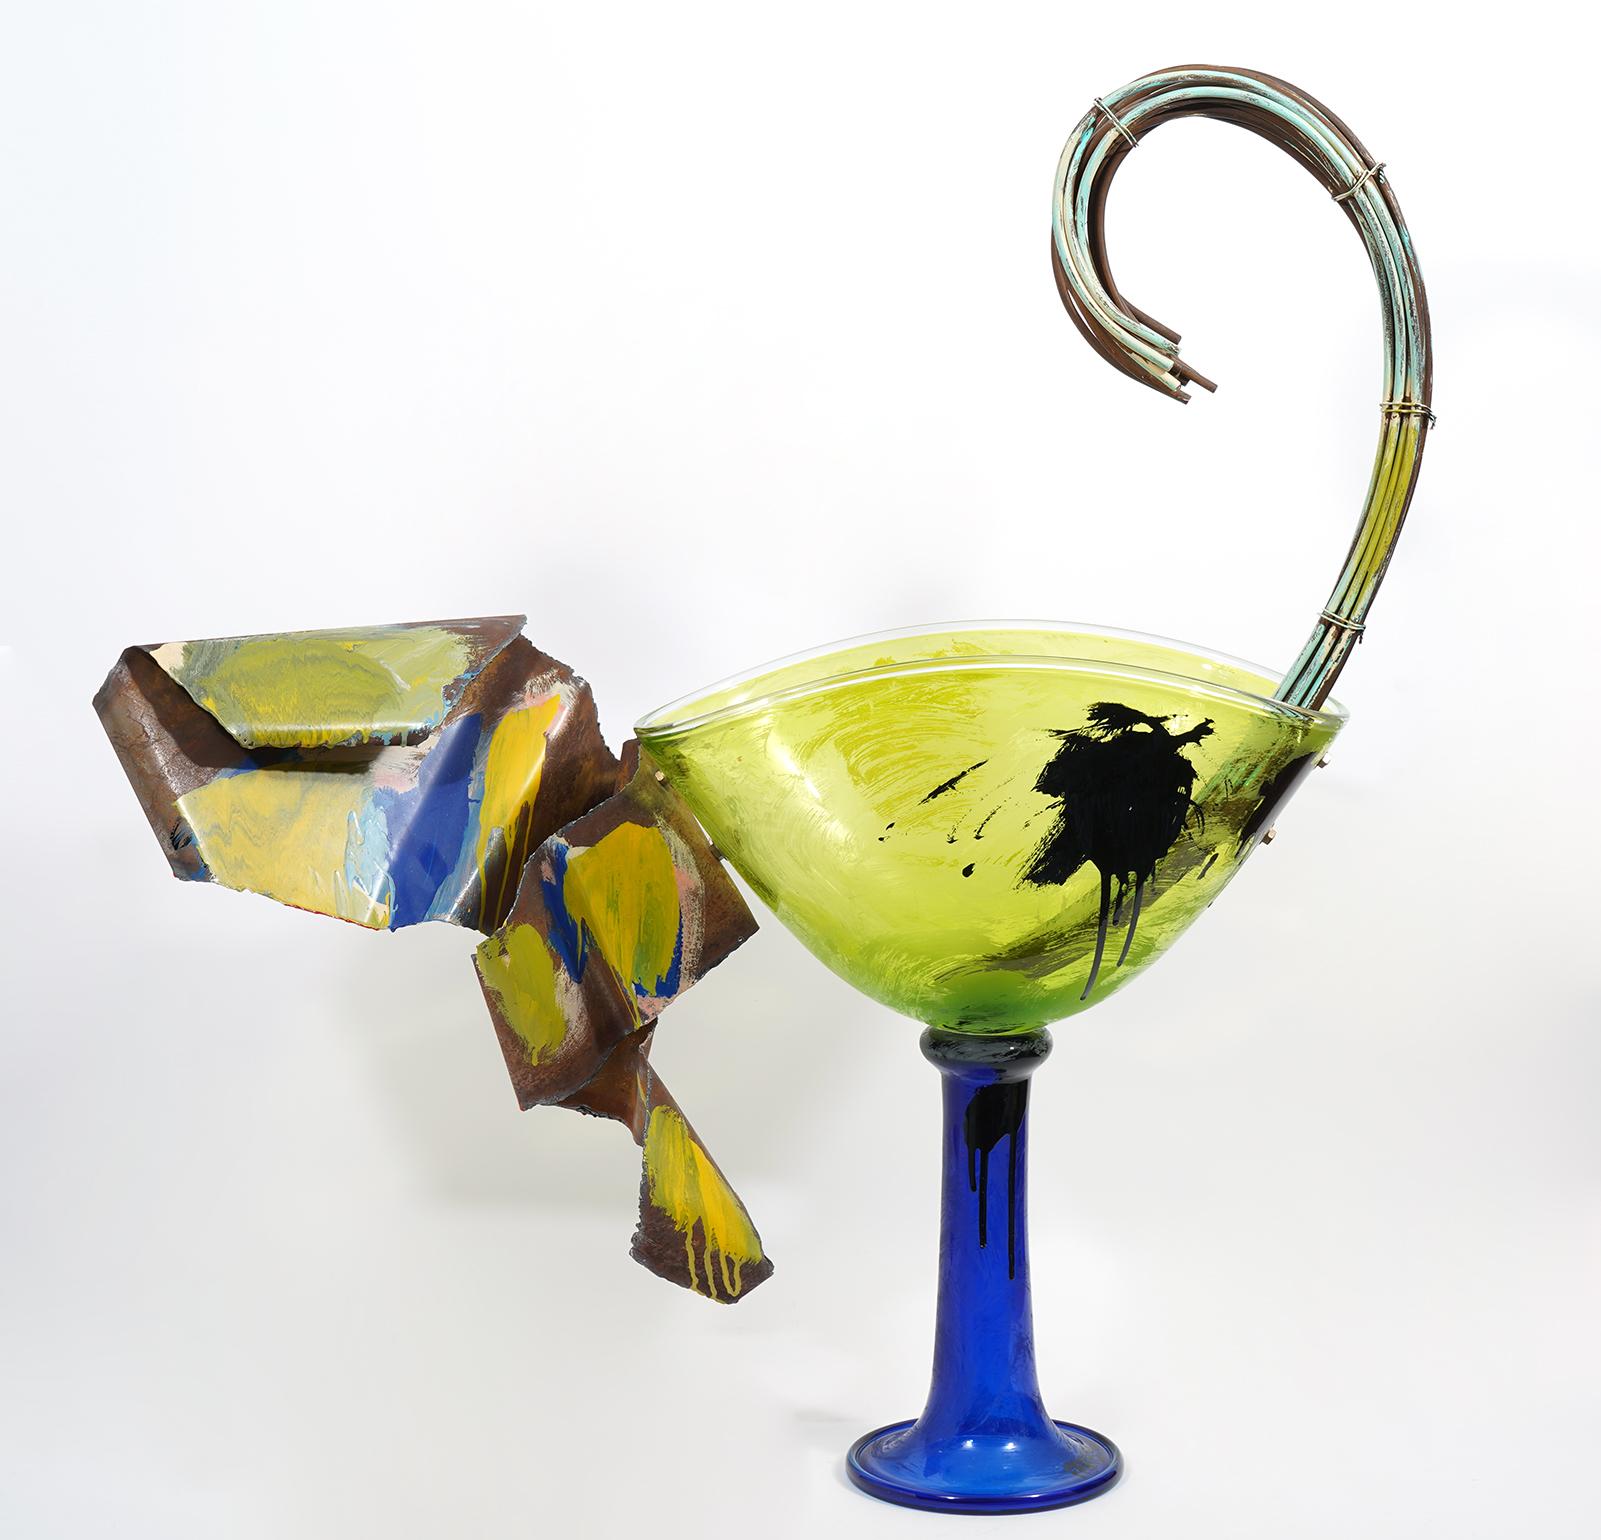 Tom Farbanish (Born 1963) large Art glass vase. Signed and dated 1992. Glass vase with two pieces of metal attach separately.